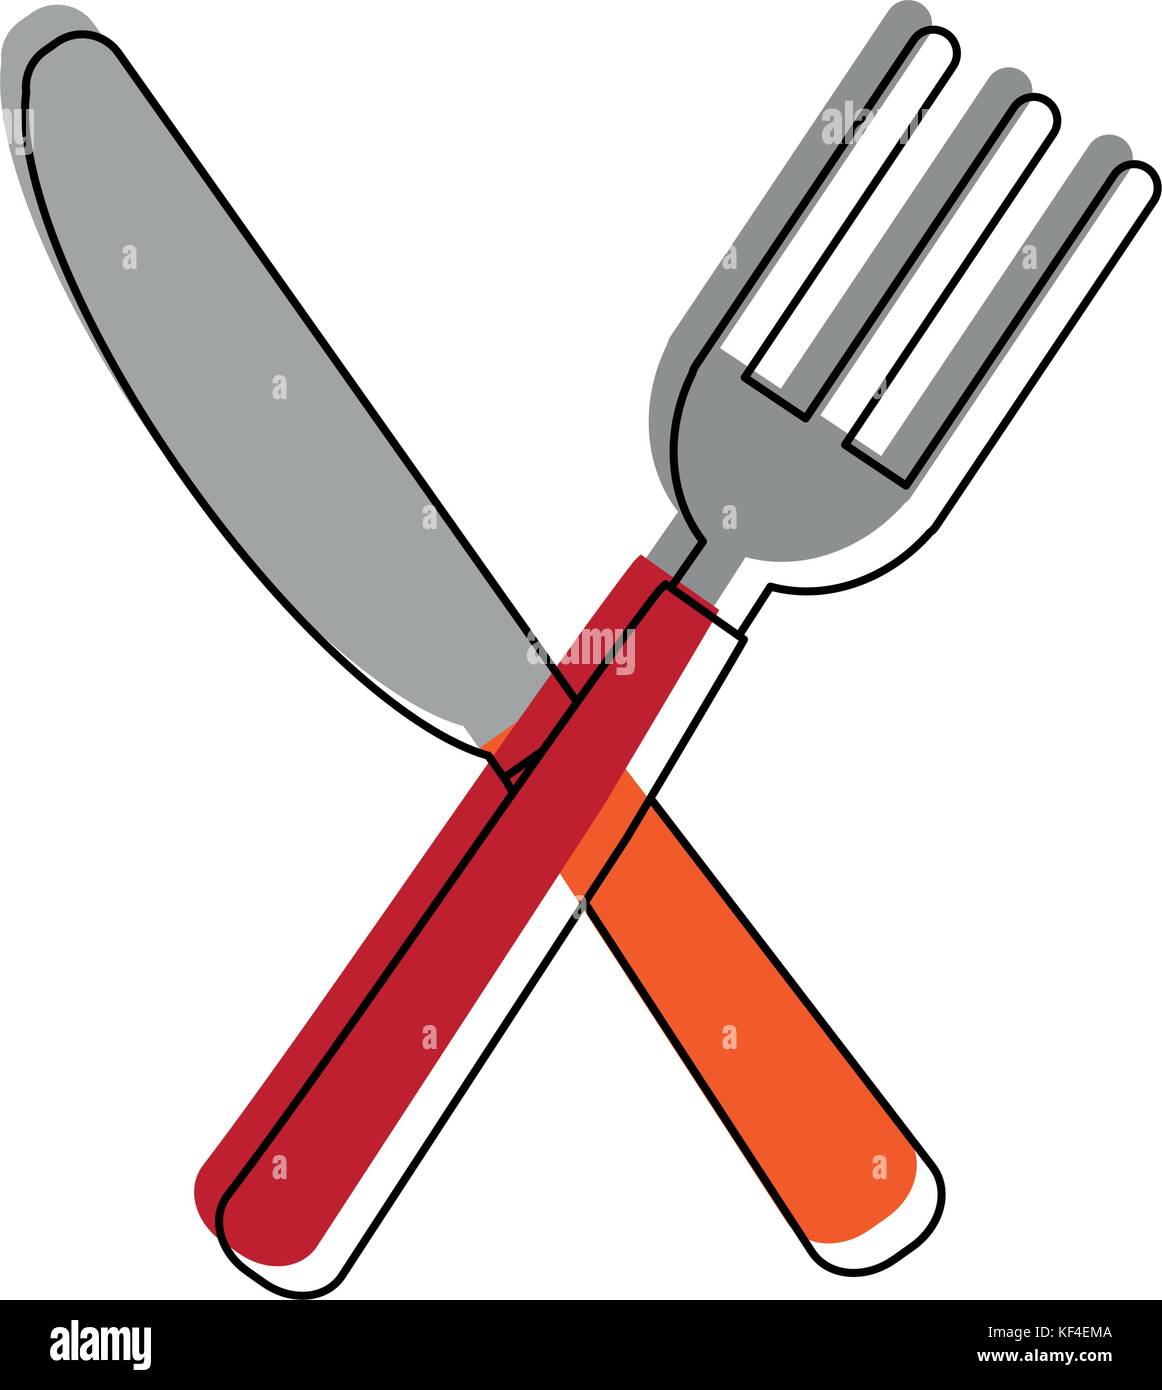 fork and knife cutlery icon image  Stock Vector